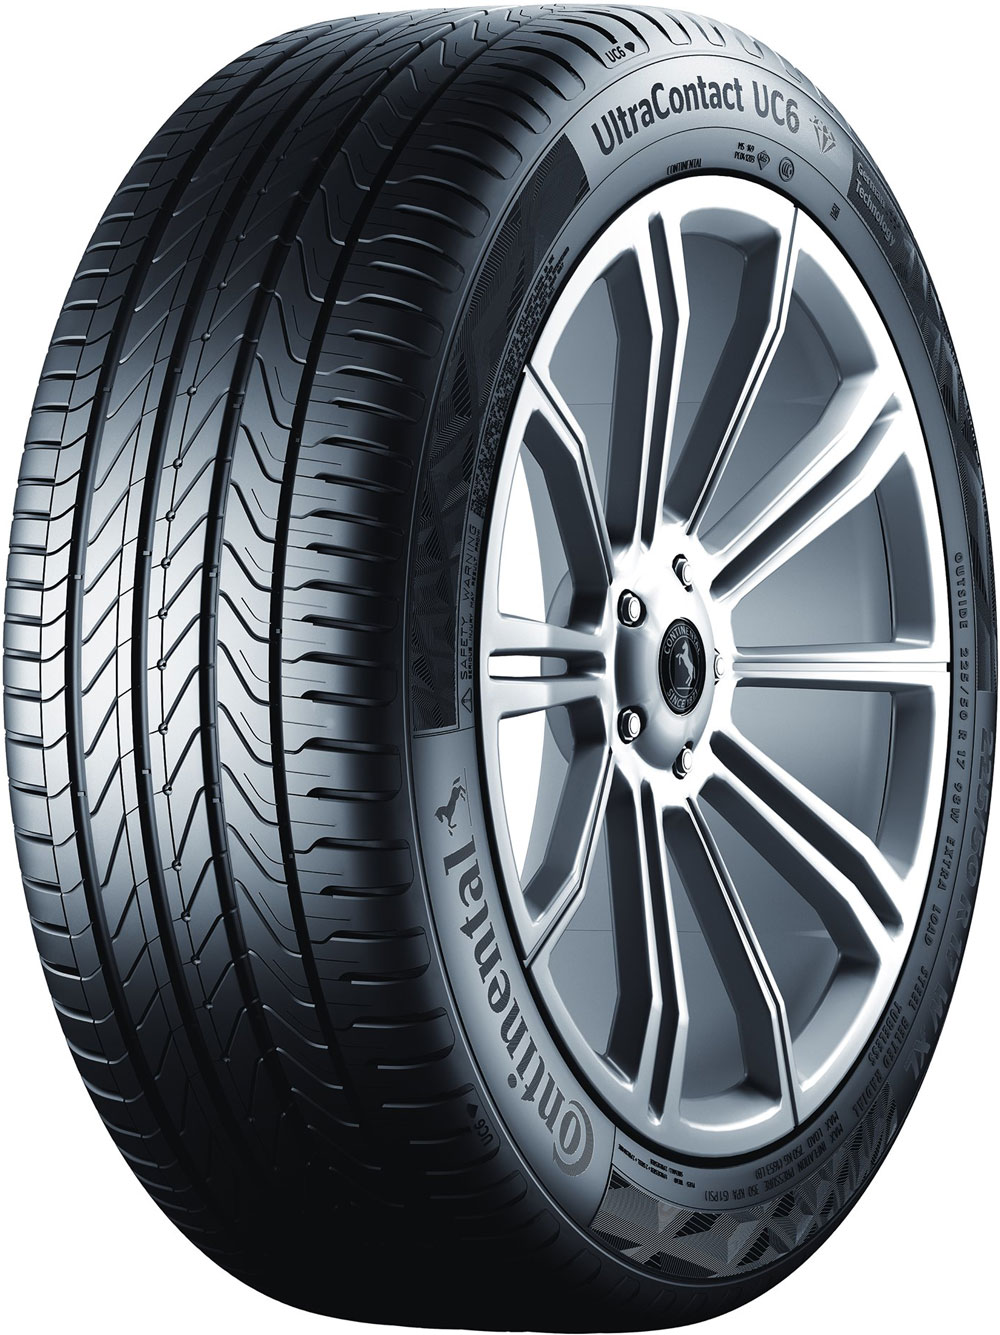 Anvelope auto CONTINENTAL UCXLFR XL 195/55 R16 91T